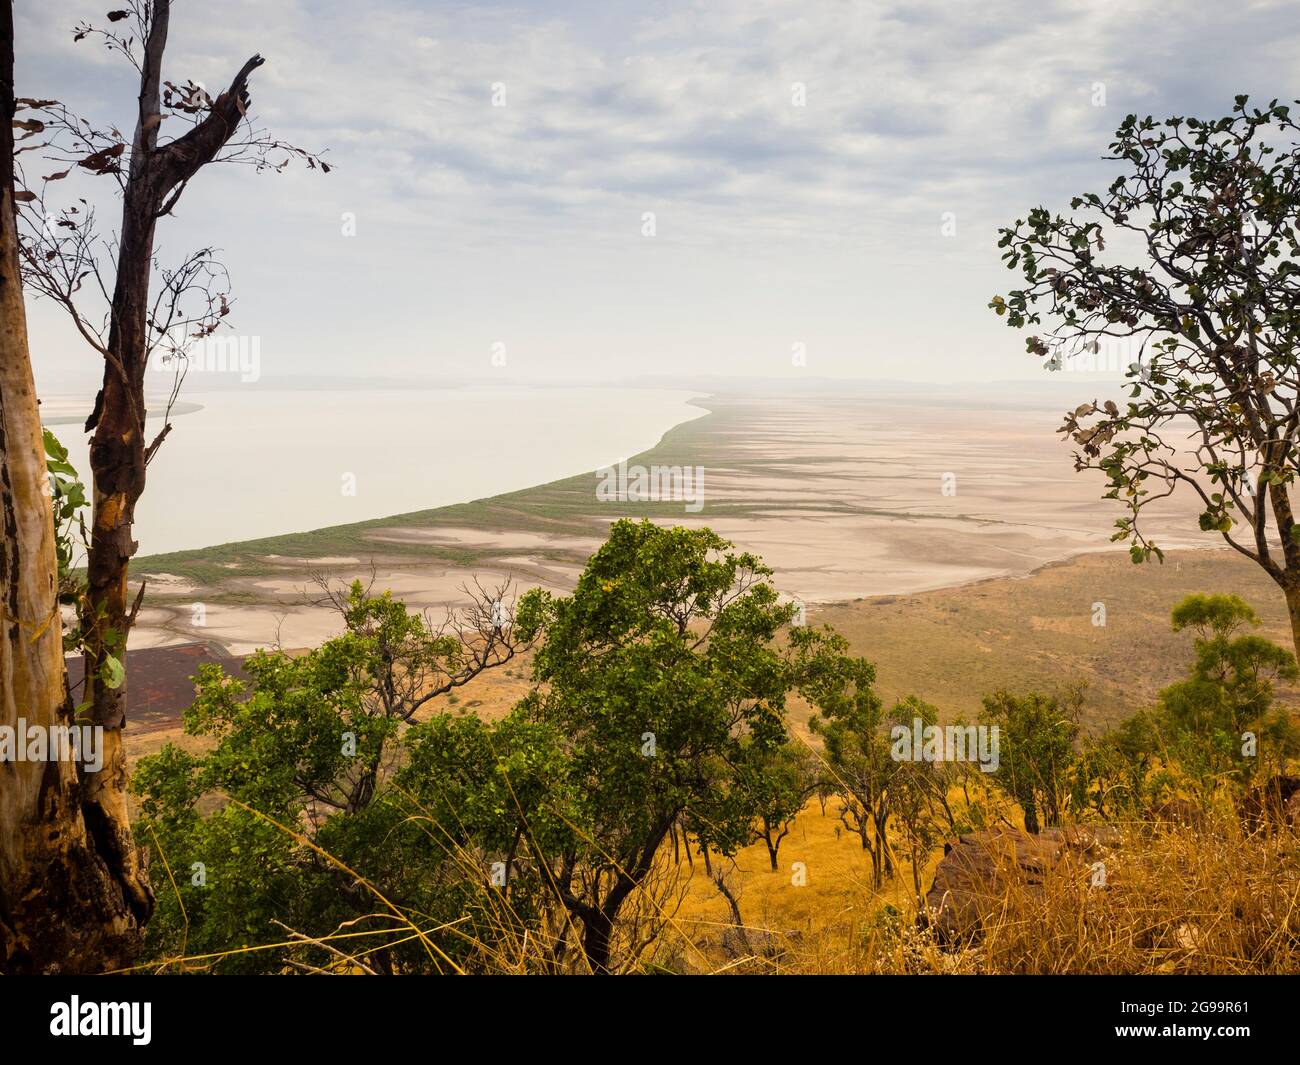 View over Cambridge Gulf from Five Rivers Lookout, Mt Bastion (325m), Wyndham, East Kimberley, Western Australia Stock Photo